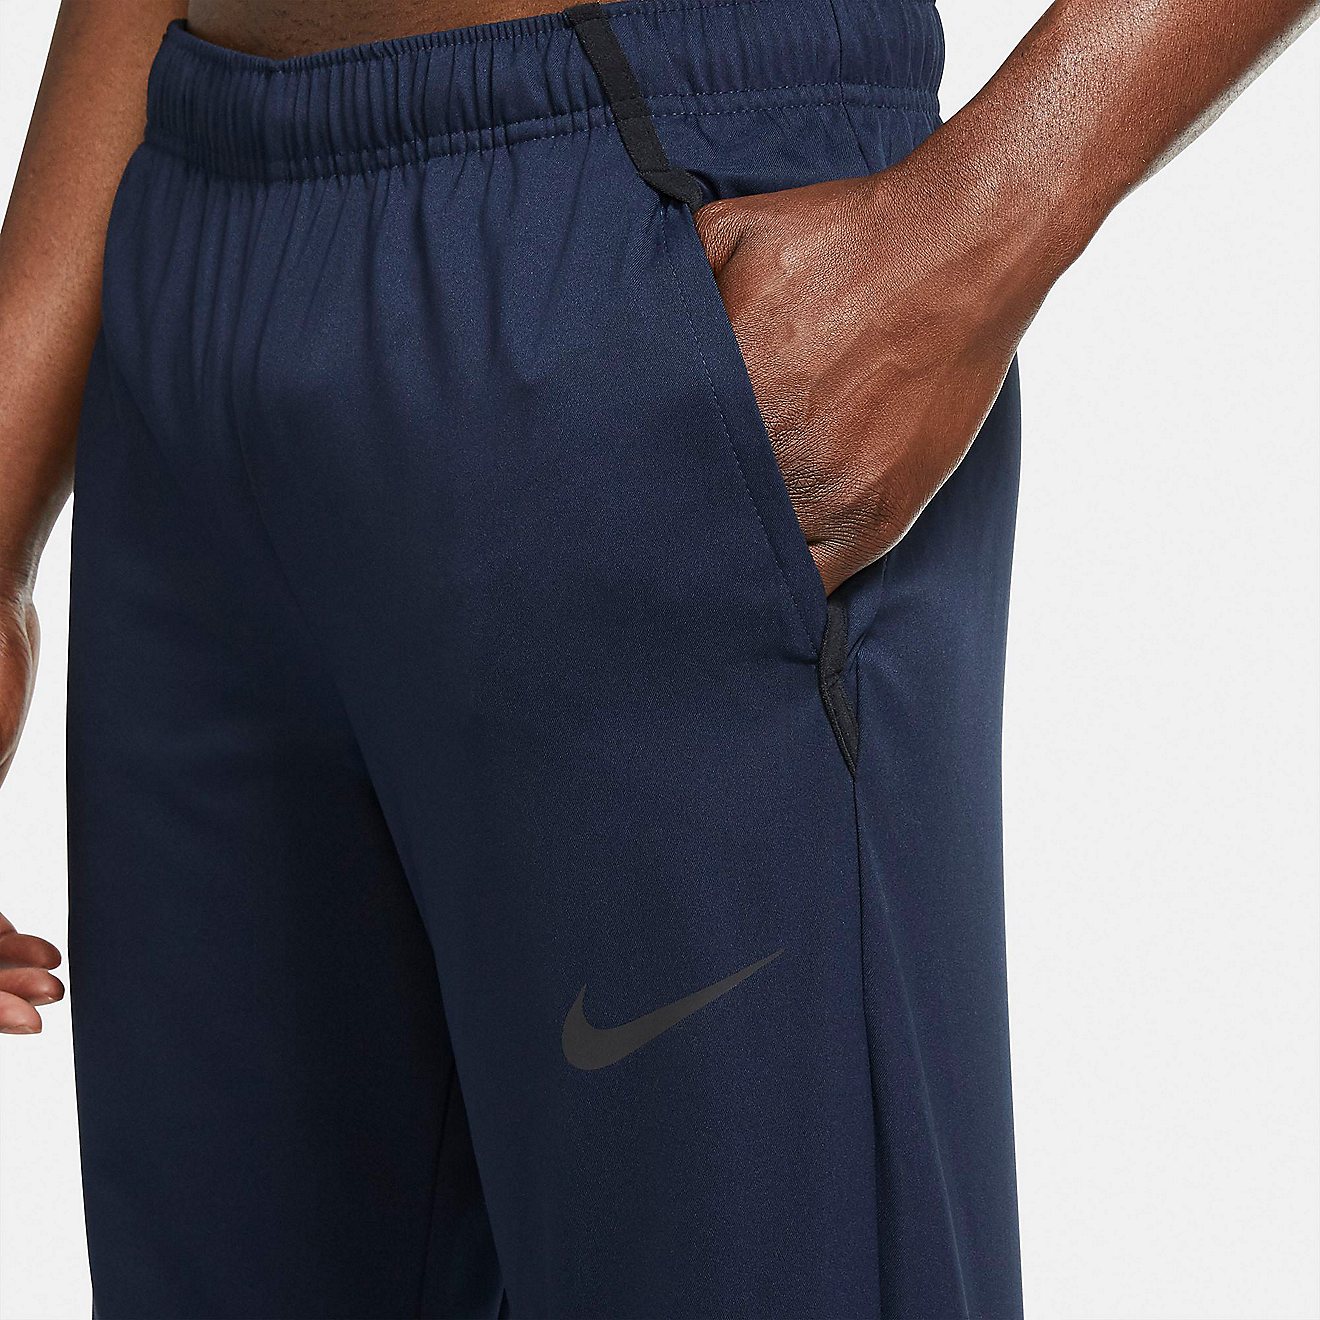 Nike Men's Dry Team Woven Pants | Free Shipping at Academy